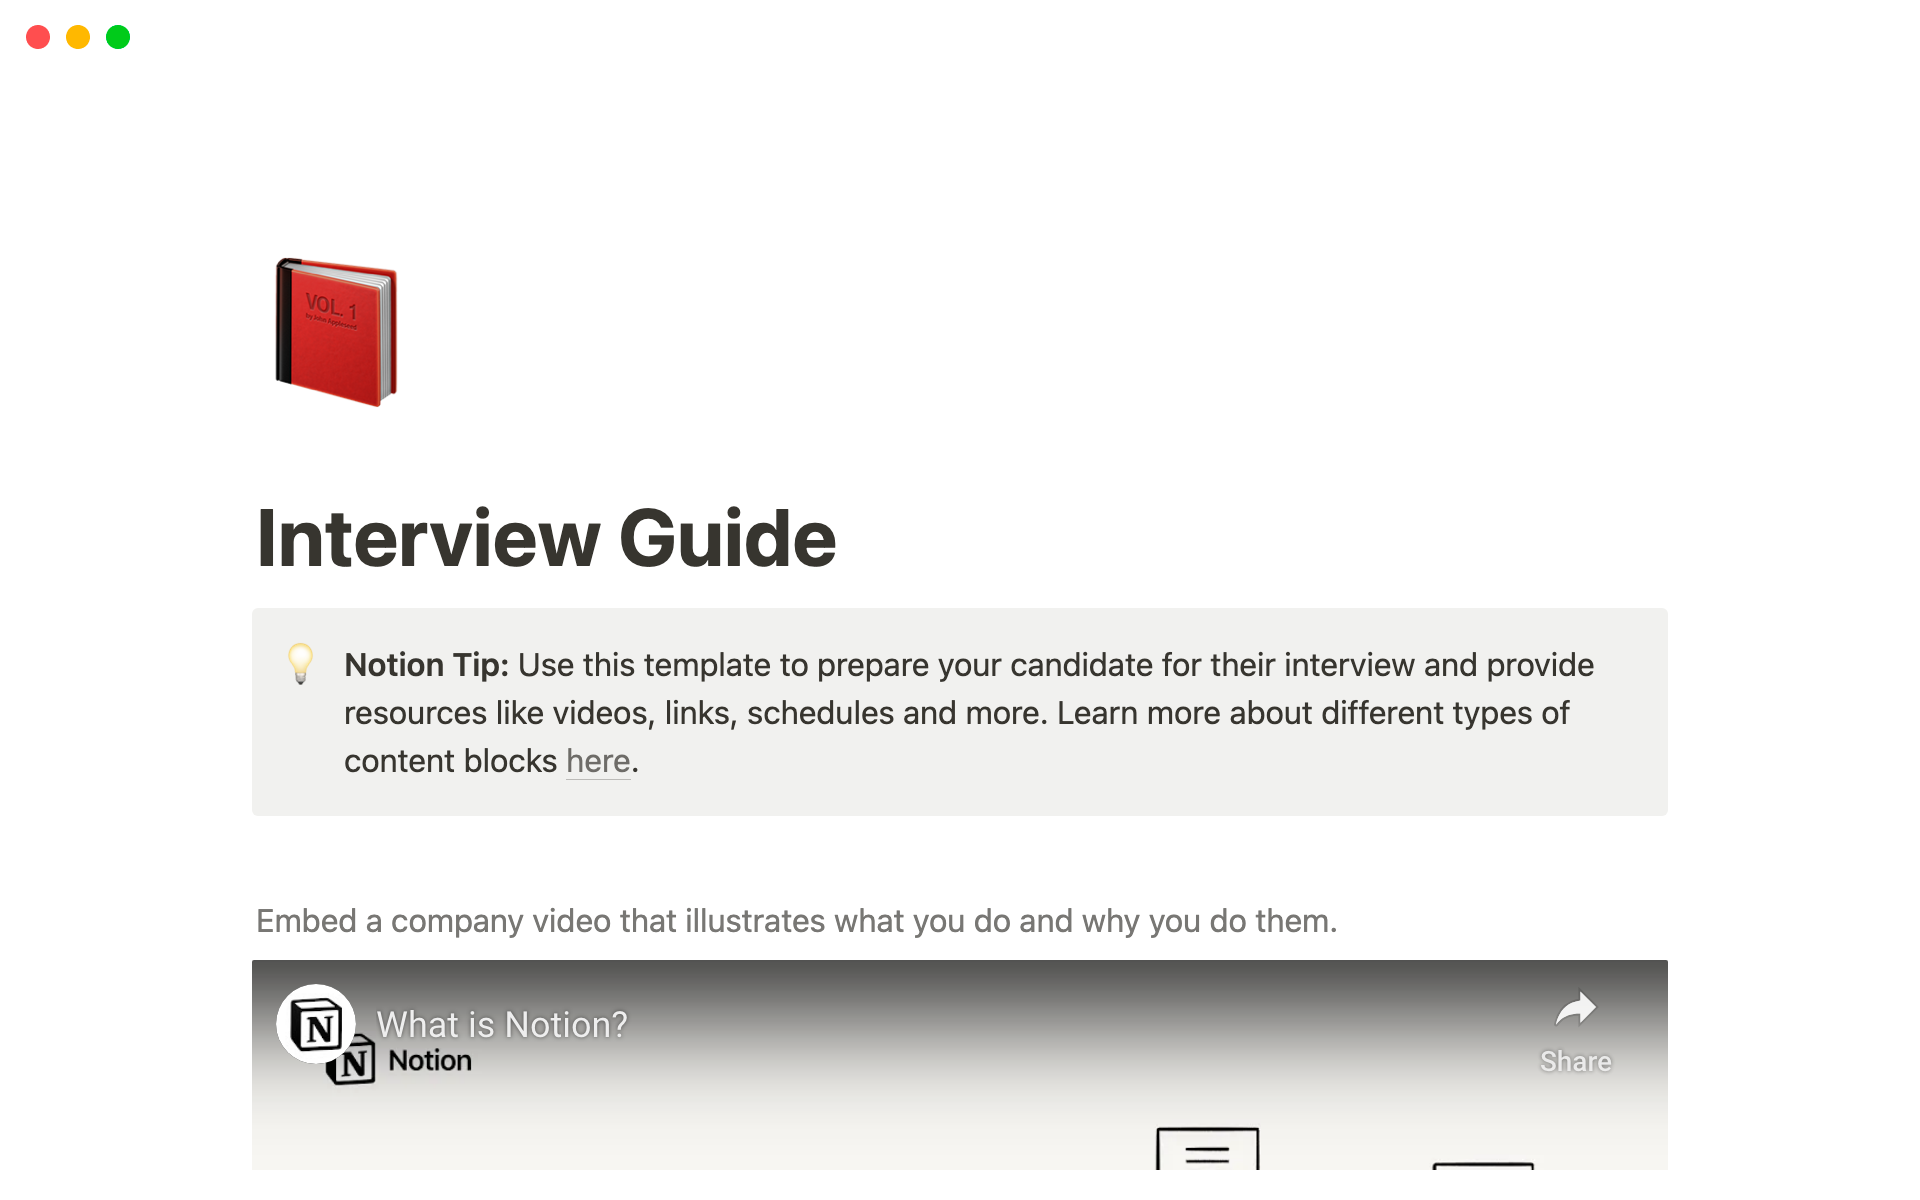 Use this template to prepare your job candidates for their interviews and offer them helpful resources like videos, links, schedules and more.